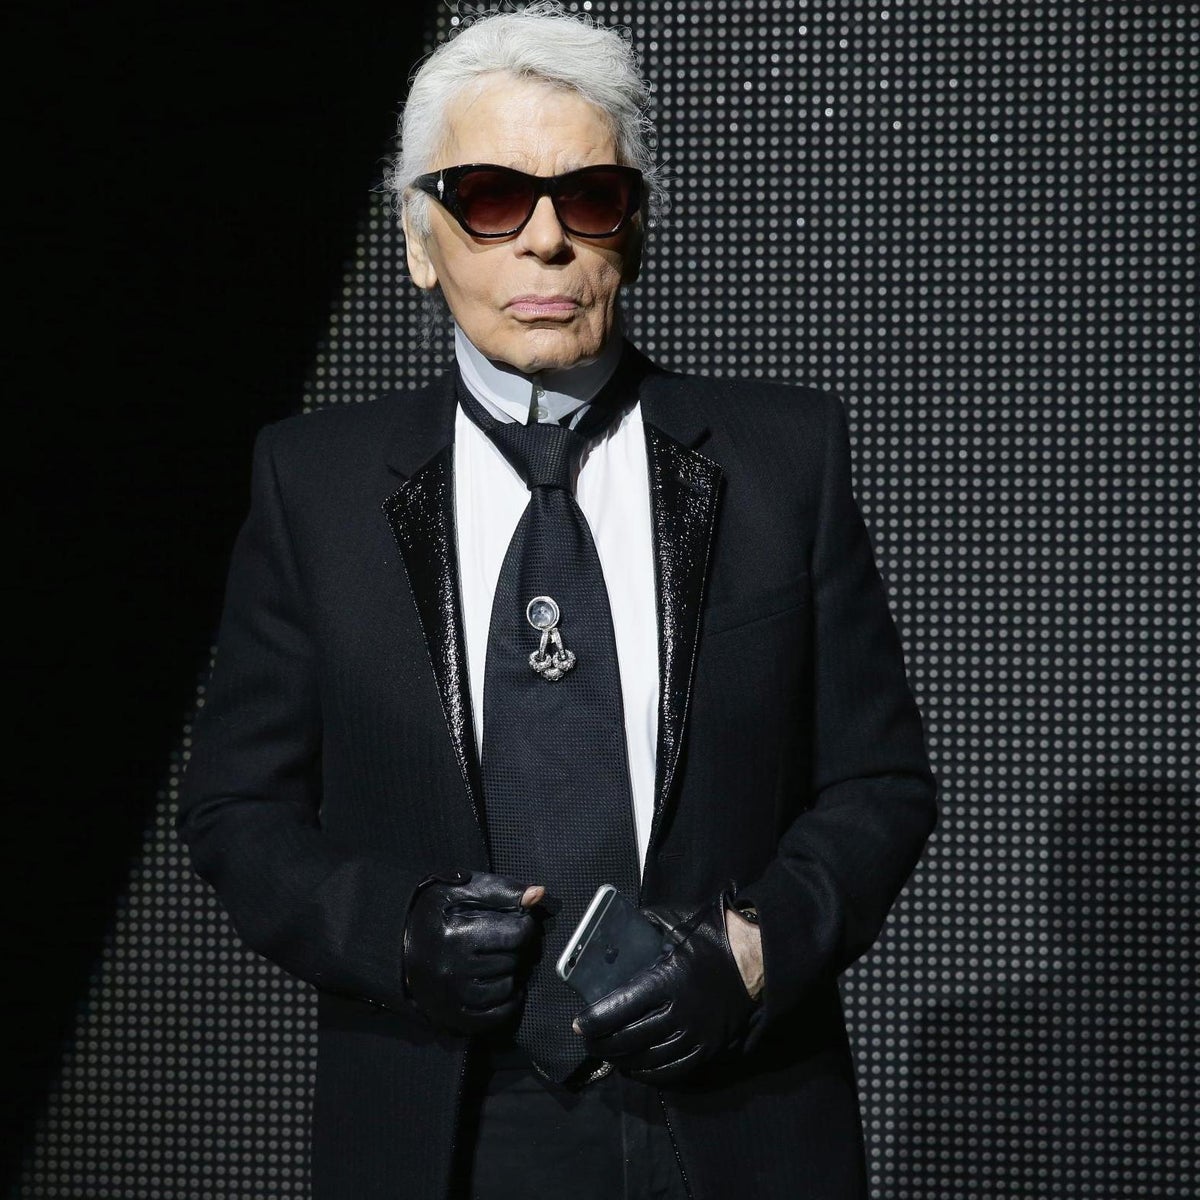 Karl Lagerfeld memorial to be held at the Grand Palais during